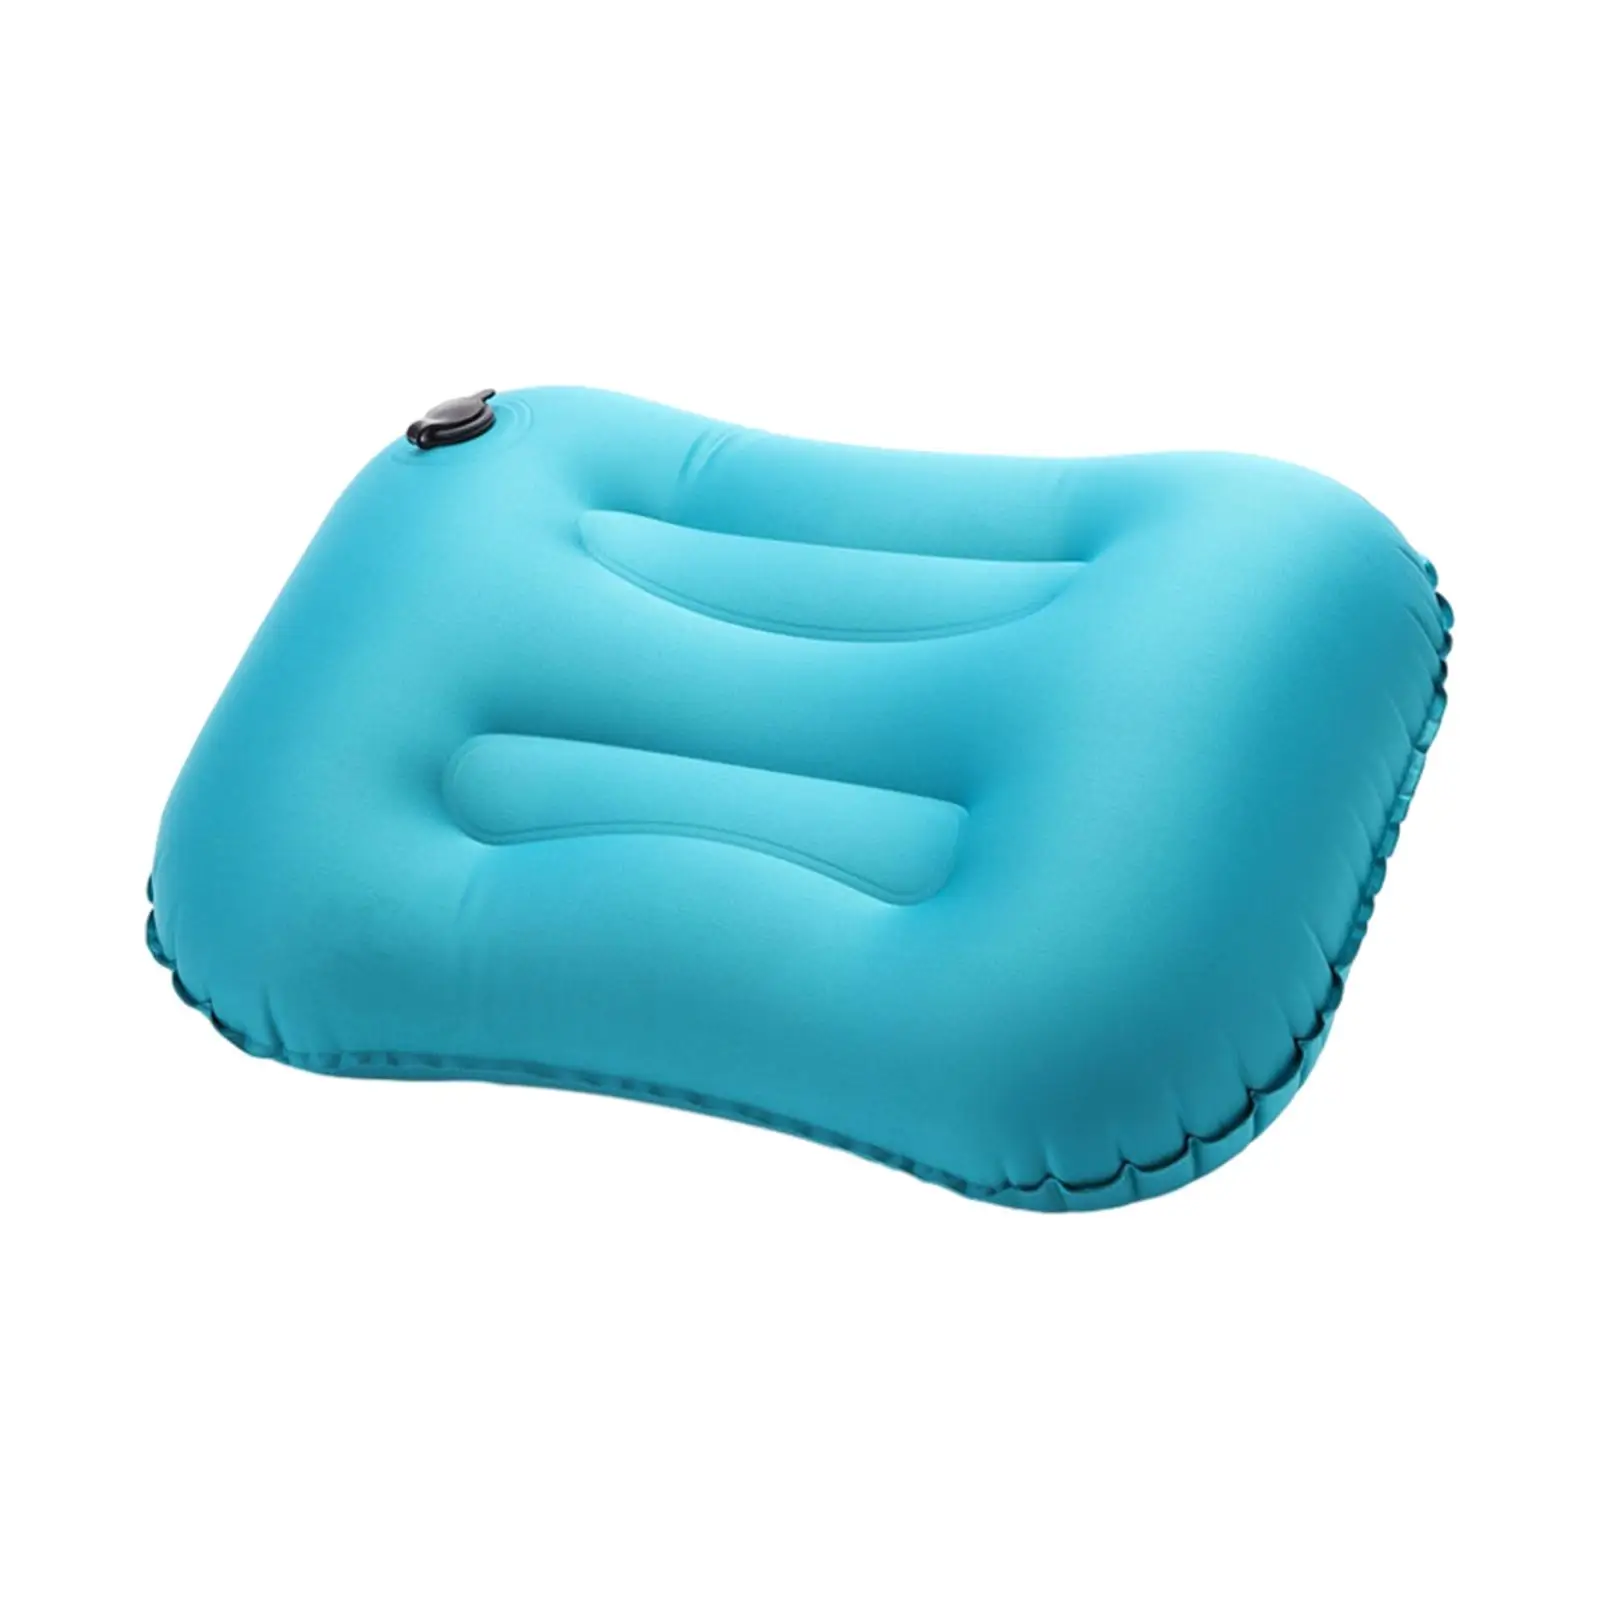 Inflatable Camping Pillow Portable for Neck Lumbar Support Compressible Pillow for Outdoor Hammock Hiking Backpacking Beach